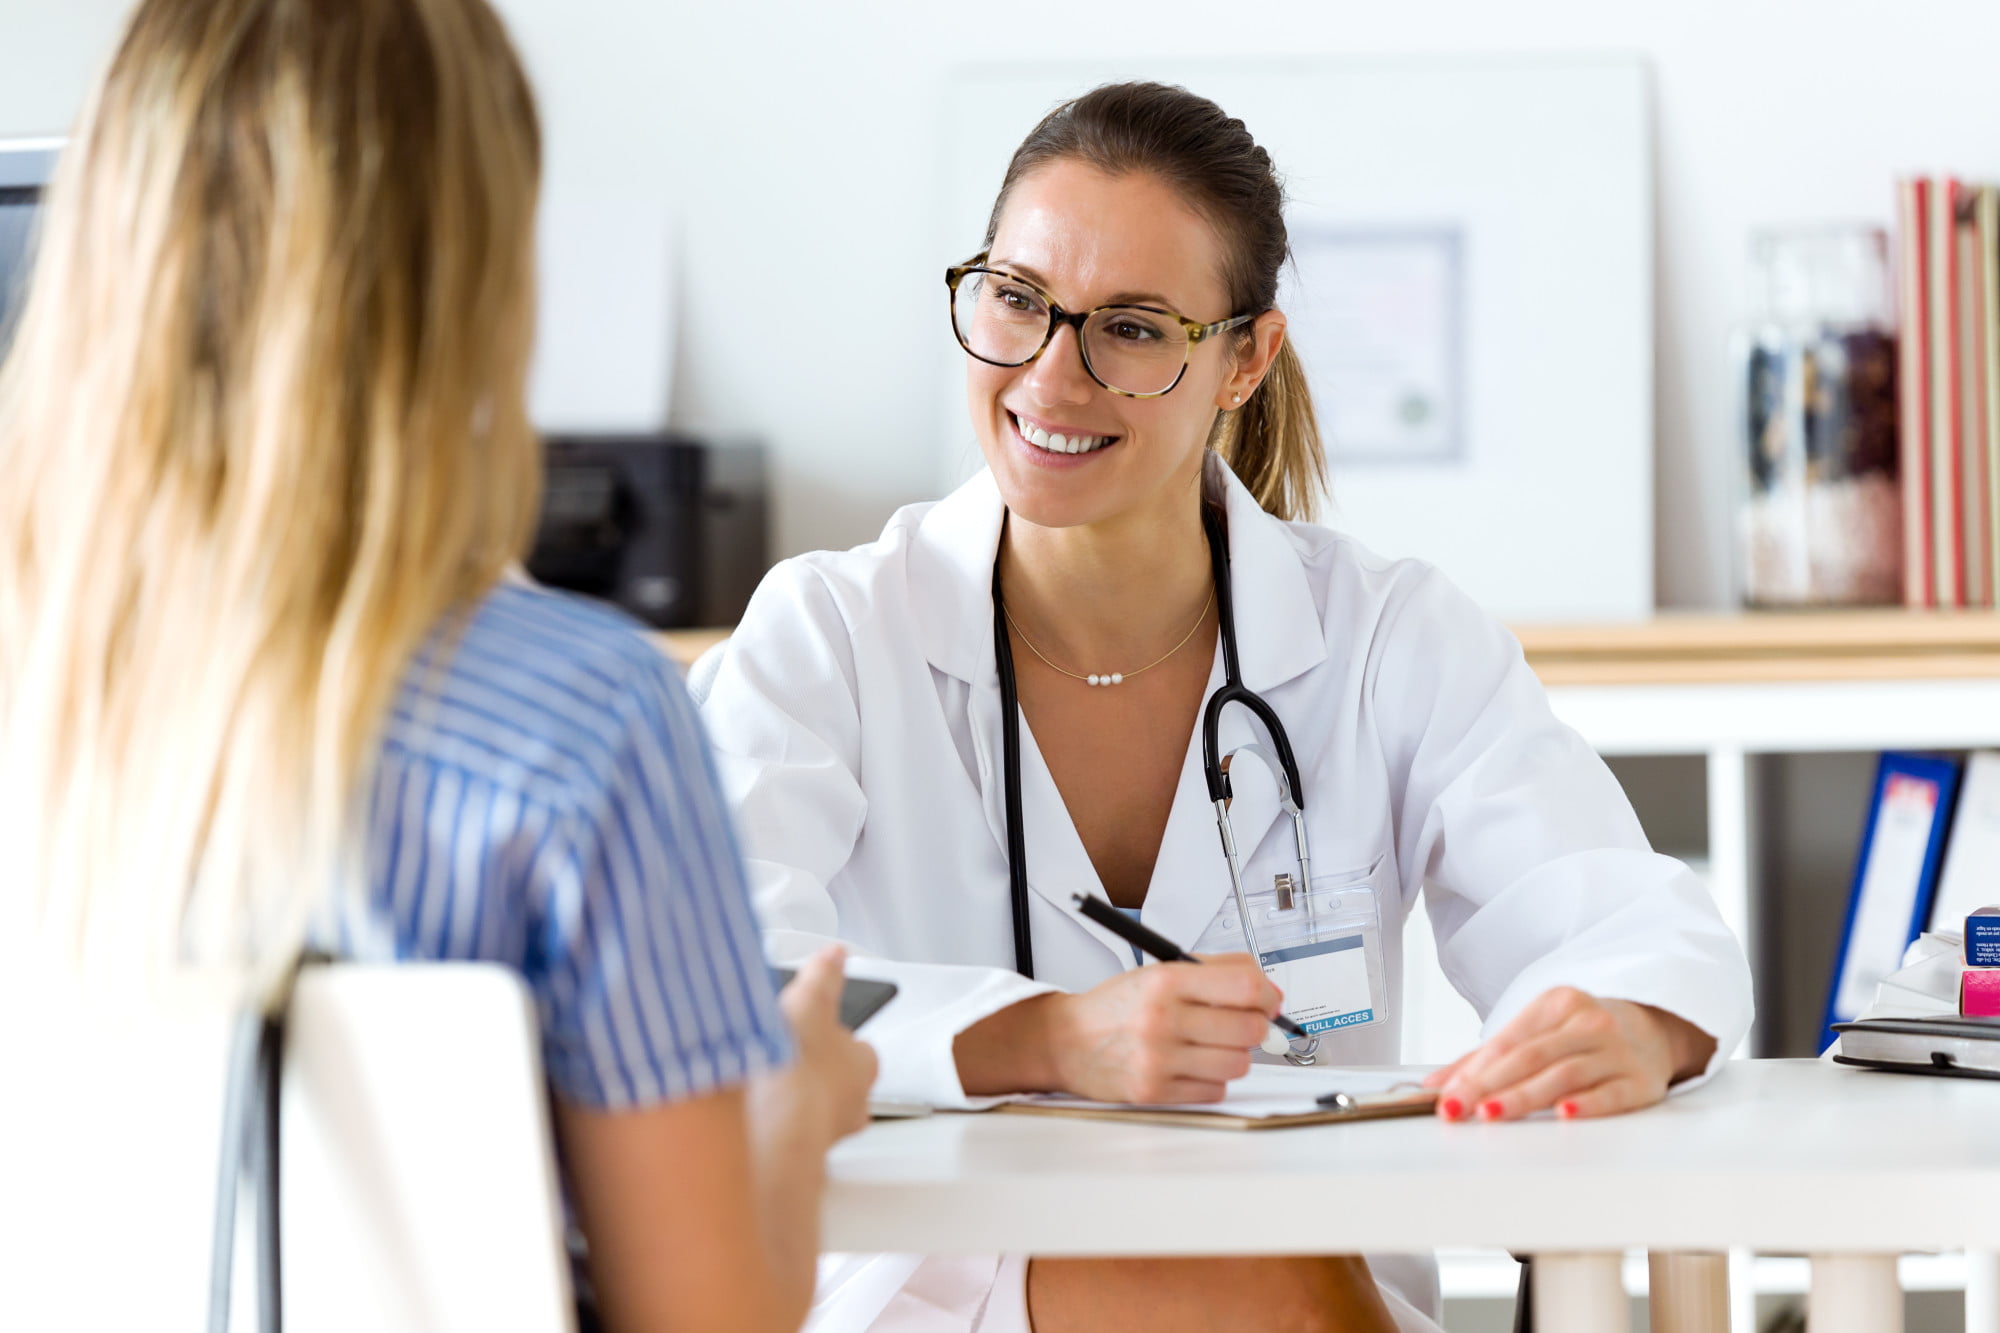 Have you ever thought about finding a new doctor? Here is a great guide so you can pick a physician that meets your needs.